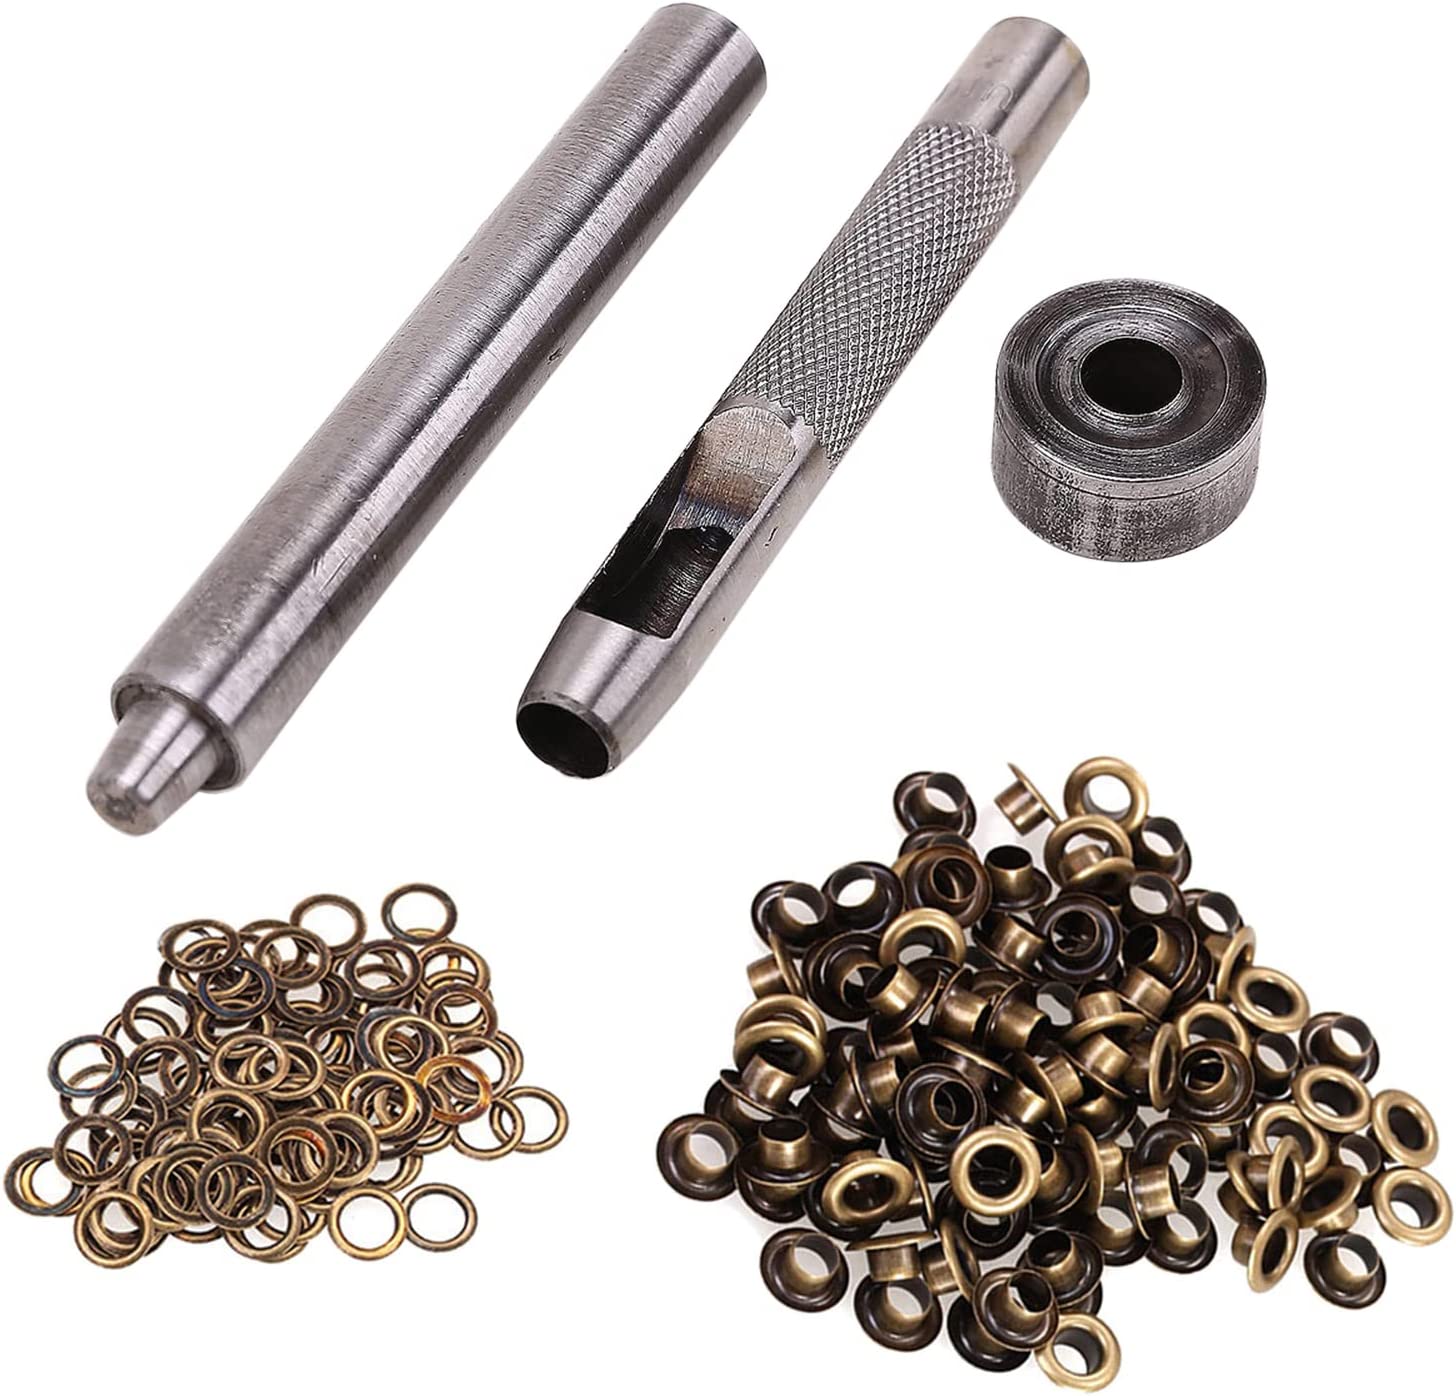 Trimming Shop 100 Set 10mm Eyelets Grommet with 3 Grommet Setting Tool  Eyelet Punch Kit for Leather, Fabric, Shoes, Handbag, Purses, Repair  Clothing